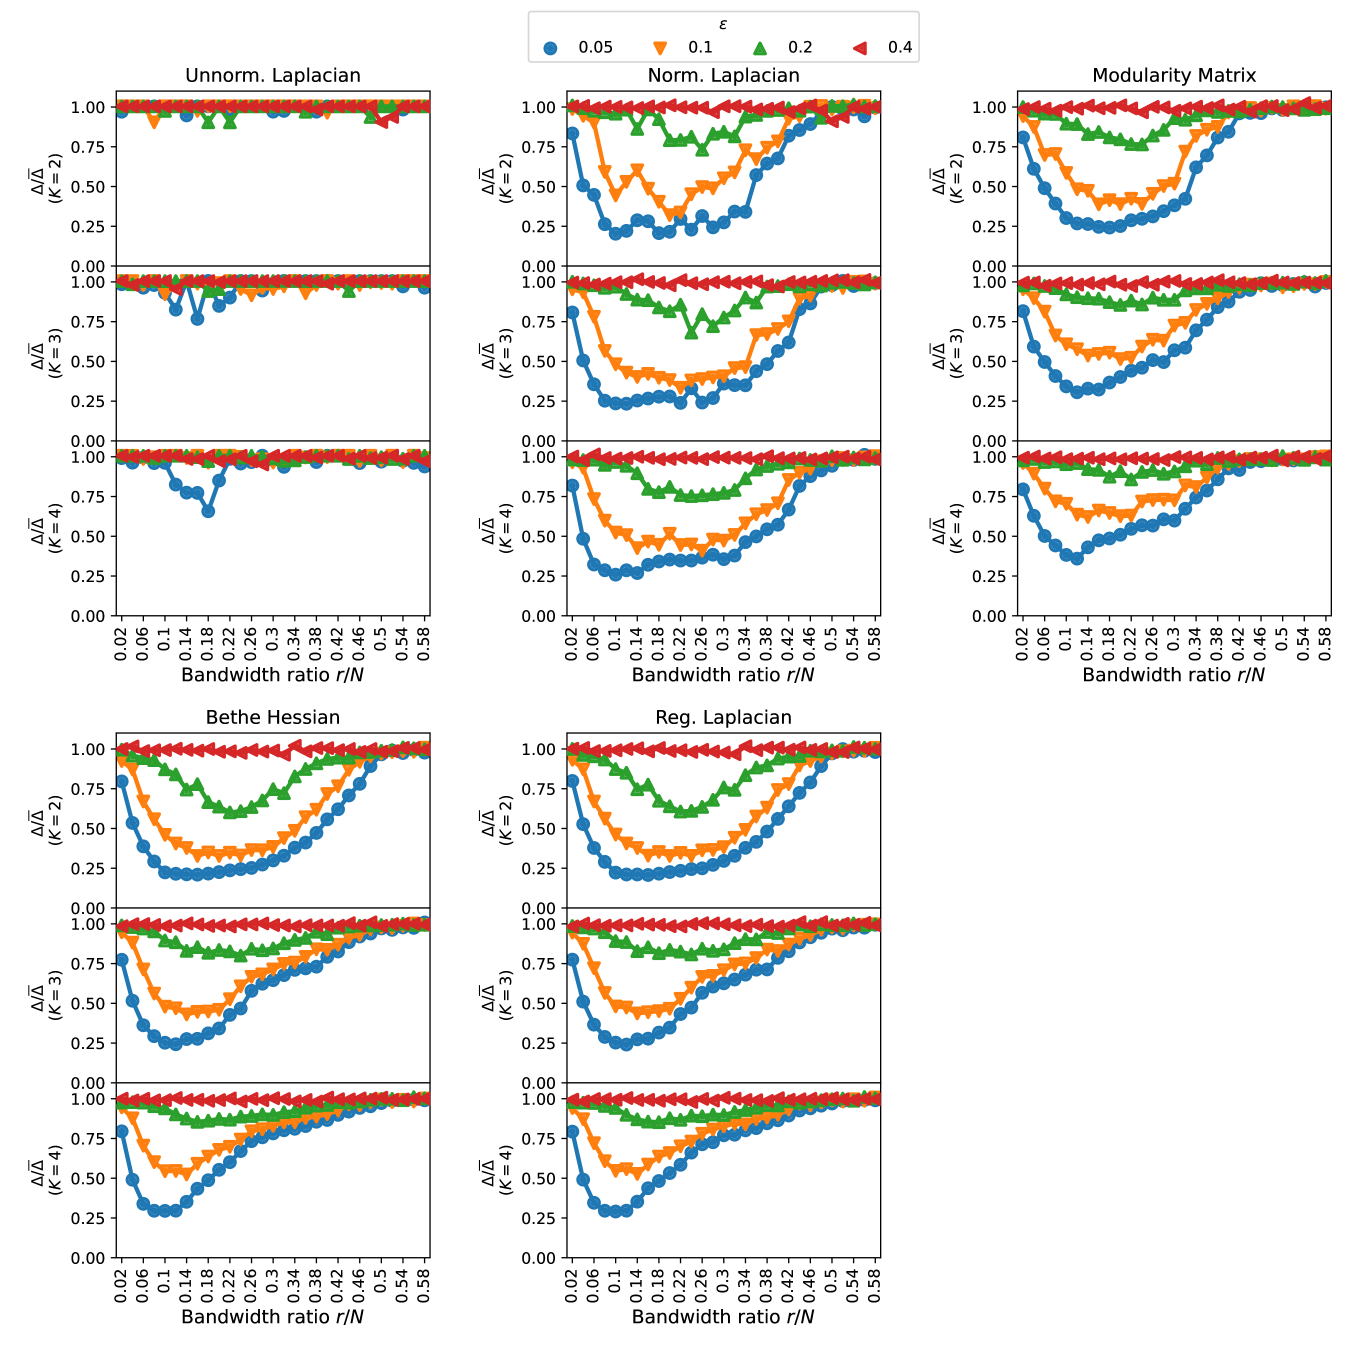 
Performance of the spectral clustering method for the graphs generated by the ORGM.
The graphs are generated by the ORGM with 